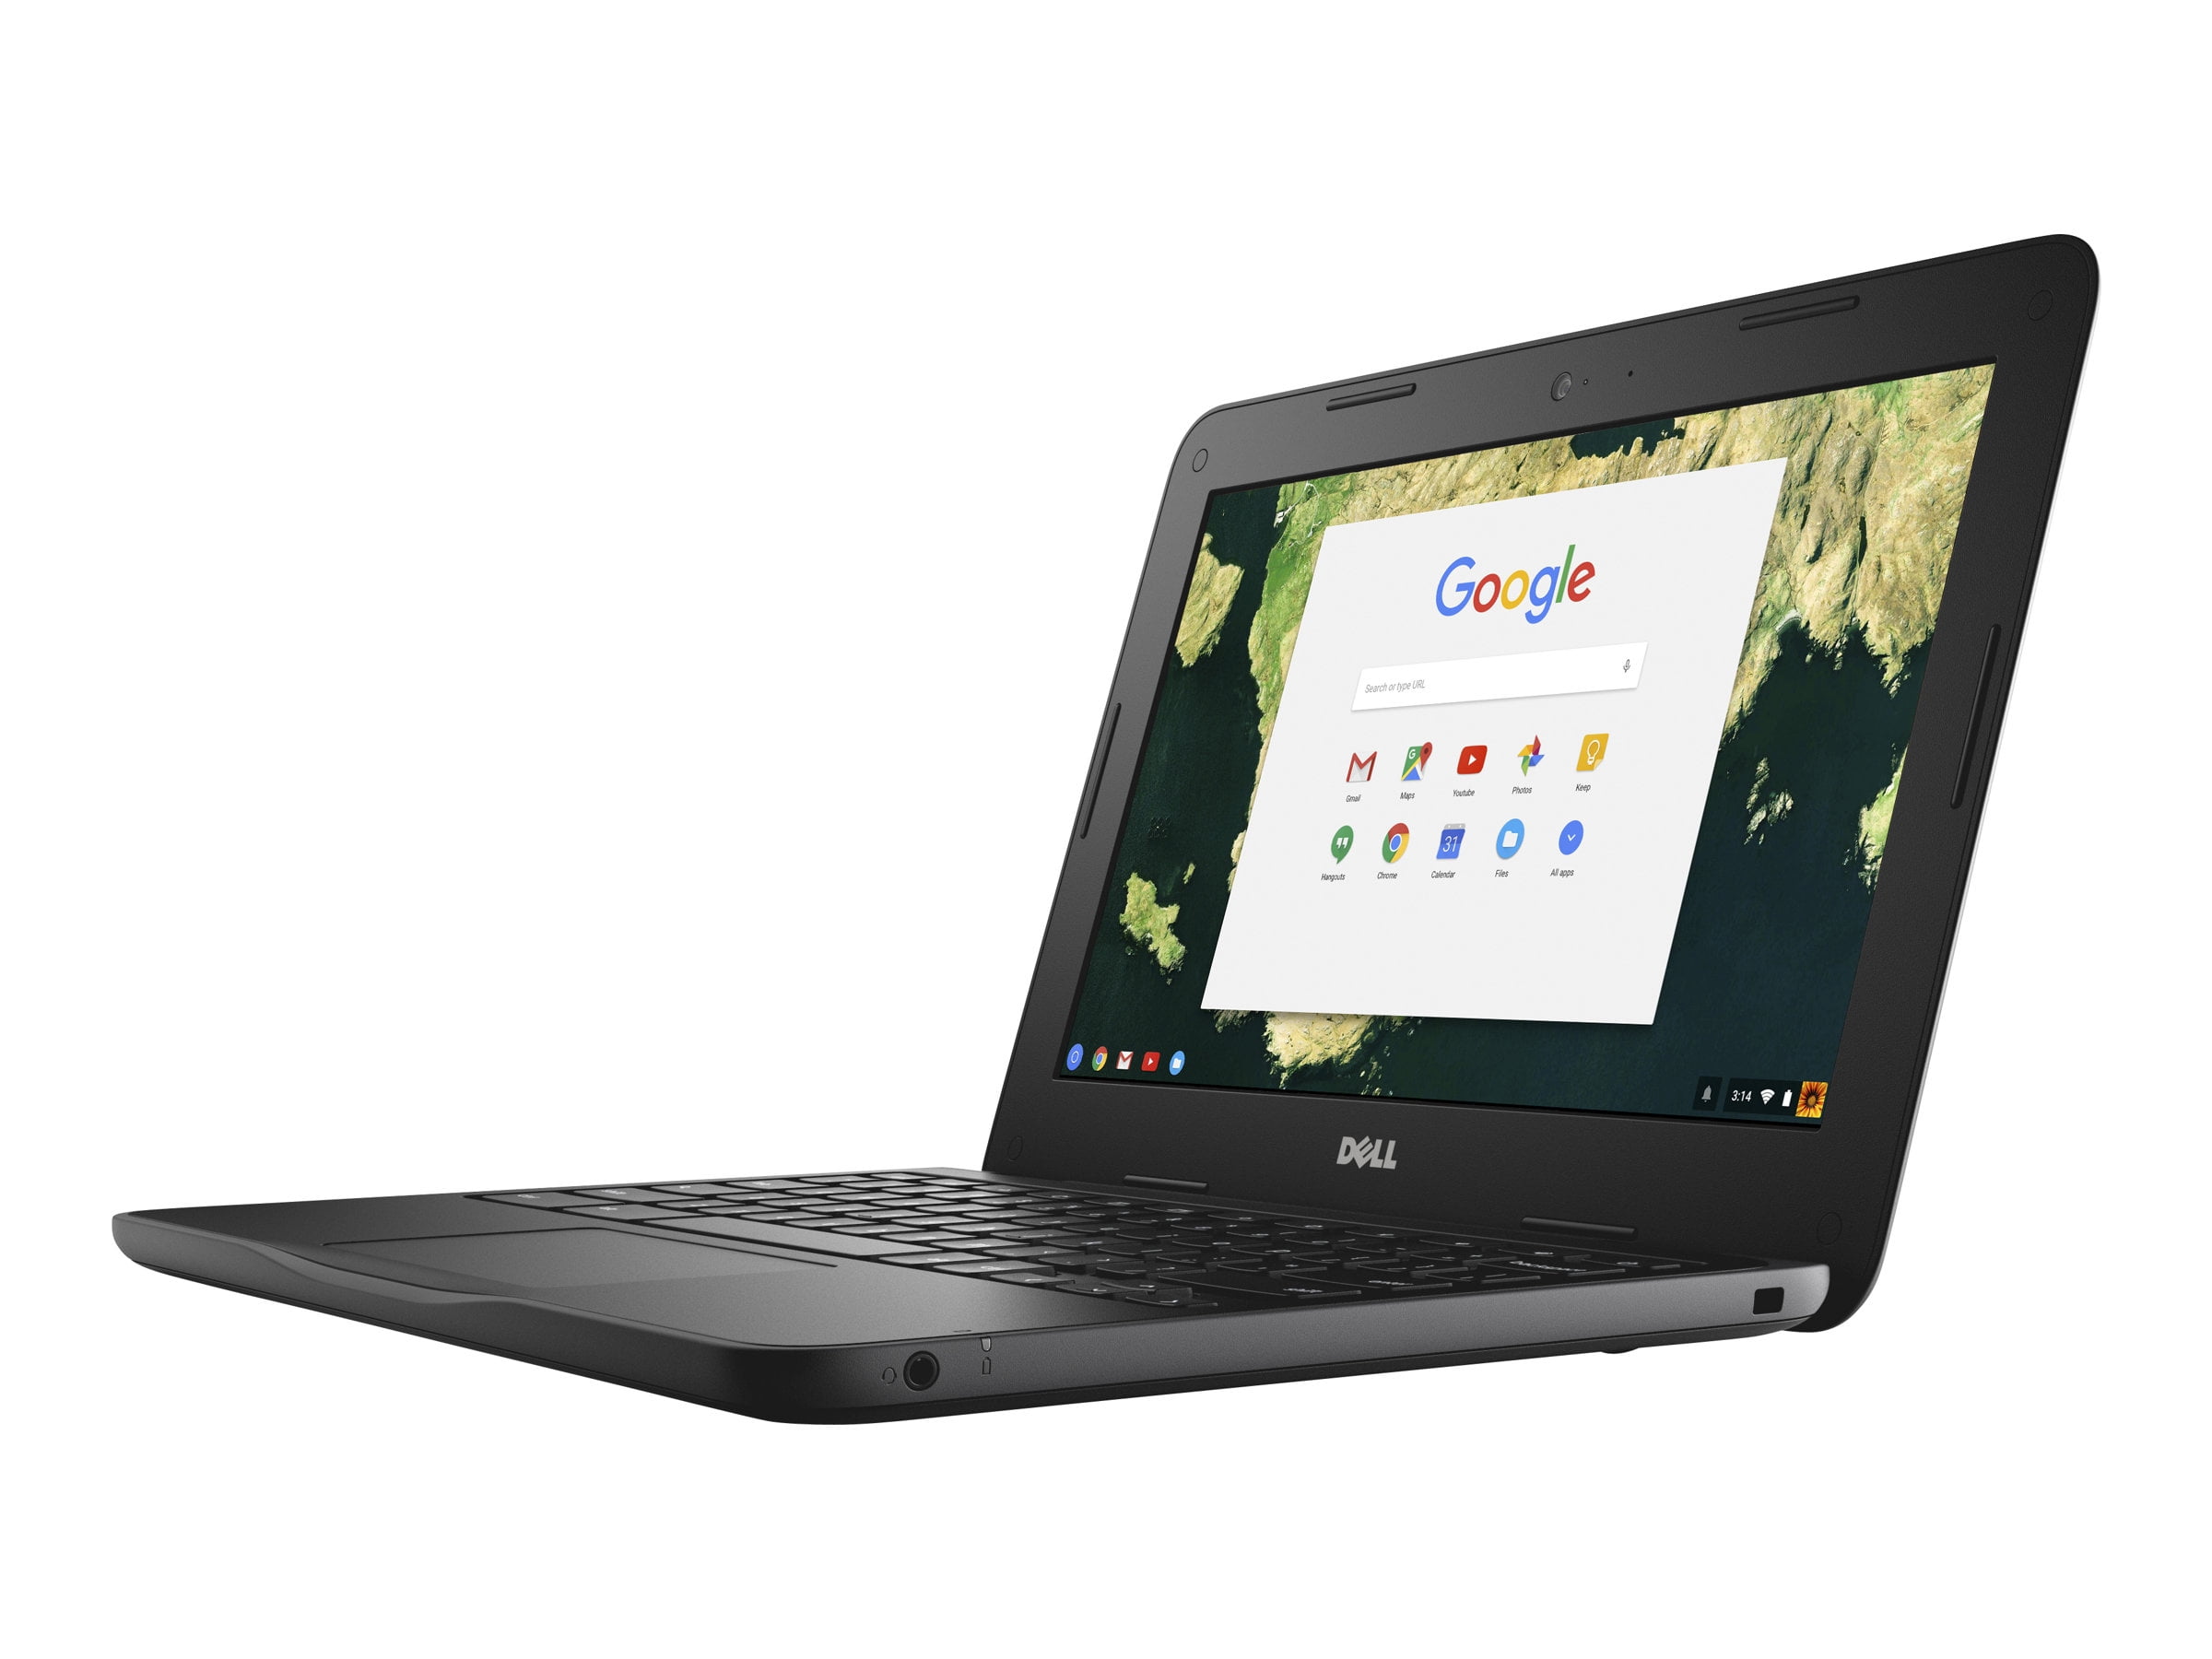 Dell Chromebook 11 3180 Celeron N3060 1 6 Ghz Chrome Os 4 Gb Ram 16 Gb Emmc 11 6 1366 X 768 Hd Hd Graphics 400 Wi Fi Black Bts With 1 Year Dell Mail In Service Walmart Com Walmart Com - how to play roblox on a google chrome os new working 2018